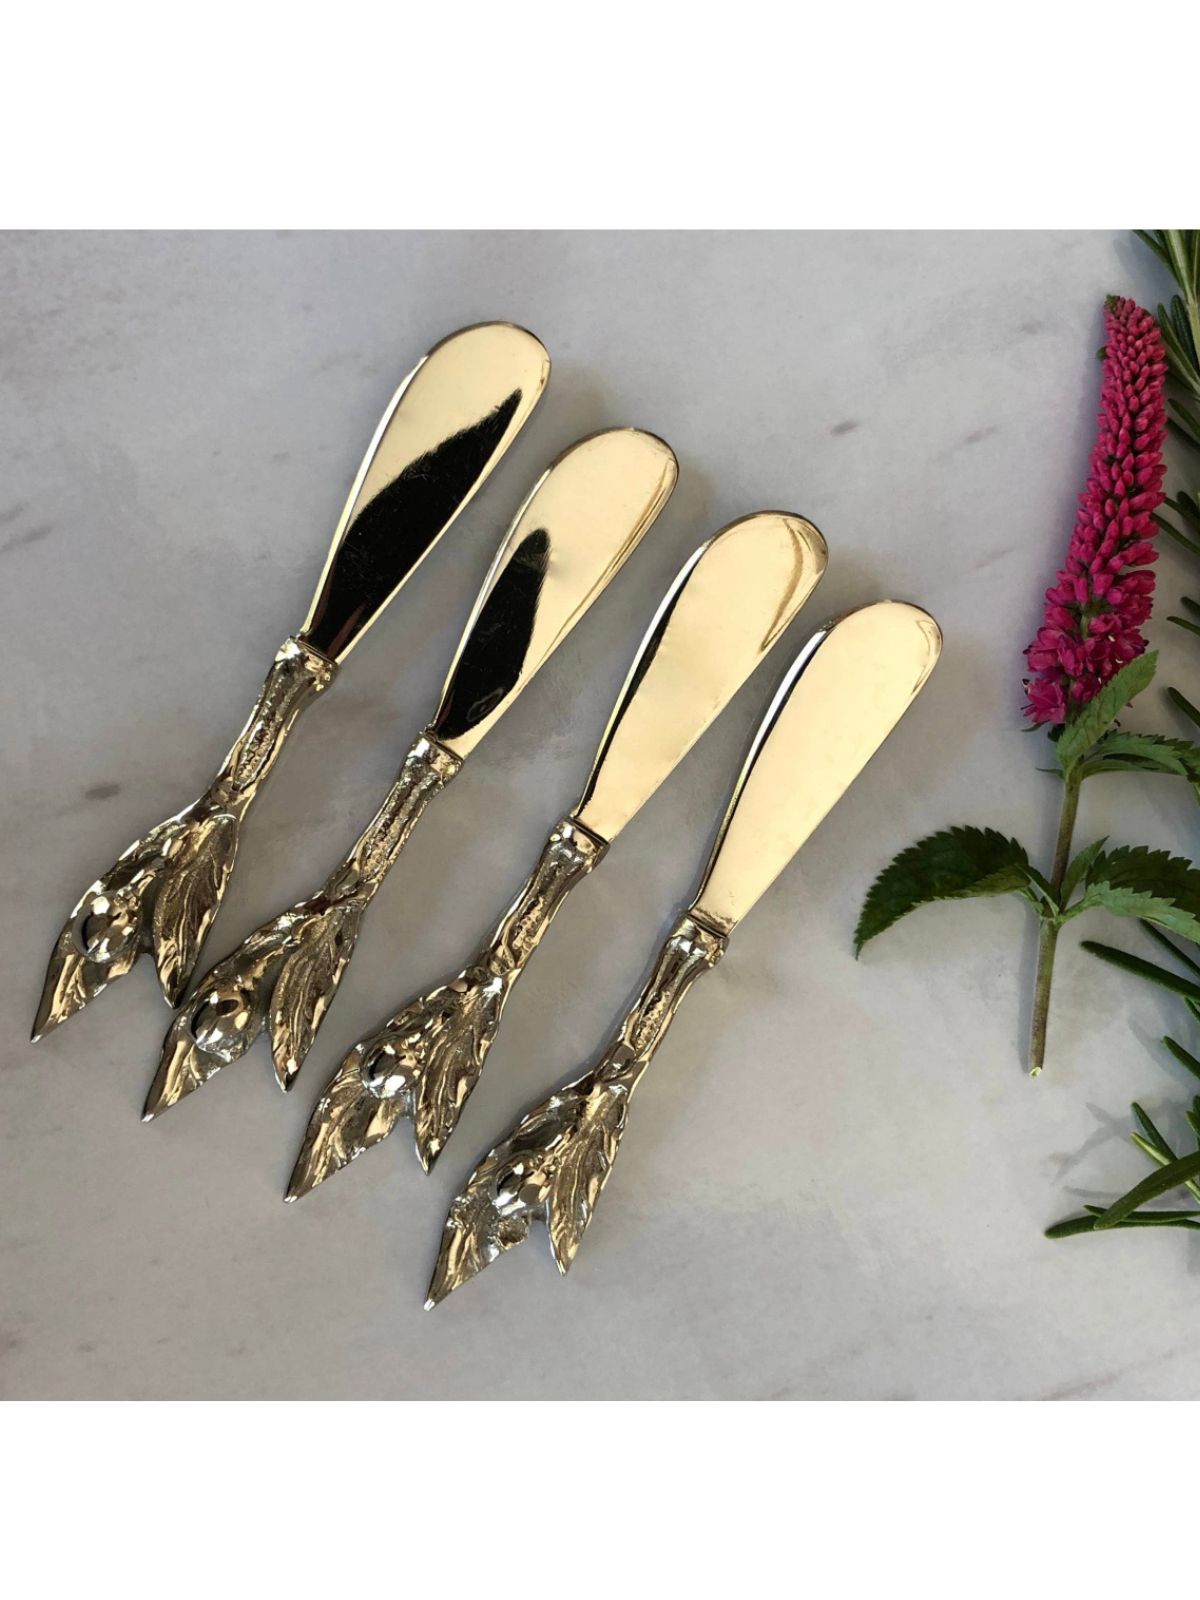 Stainless Steel Spreaders with Olive Branch Designed Handles Sold by KYA Home Decor.